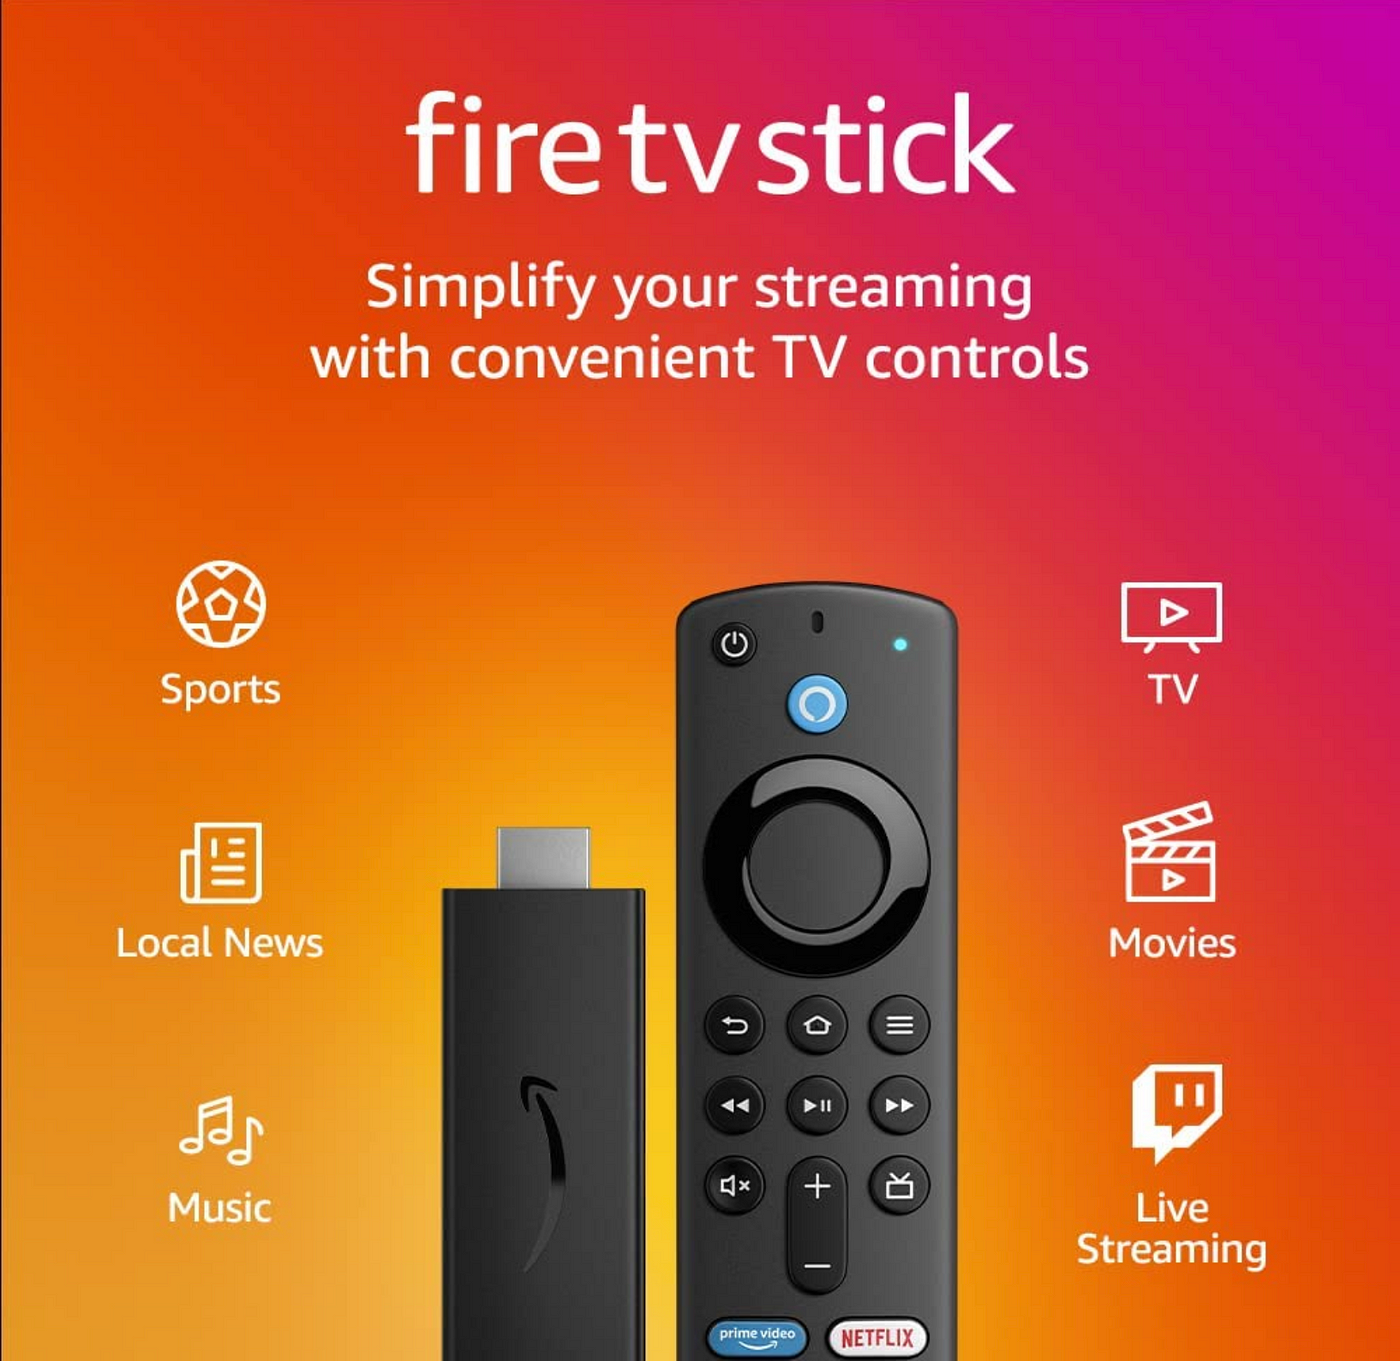 Films and TV series– Smart Home Entertainment